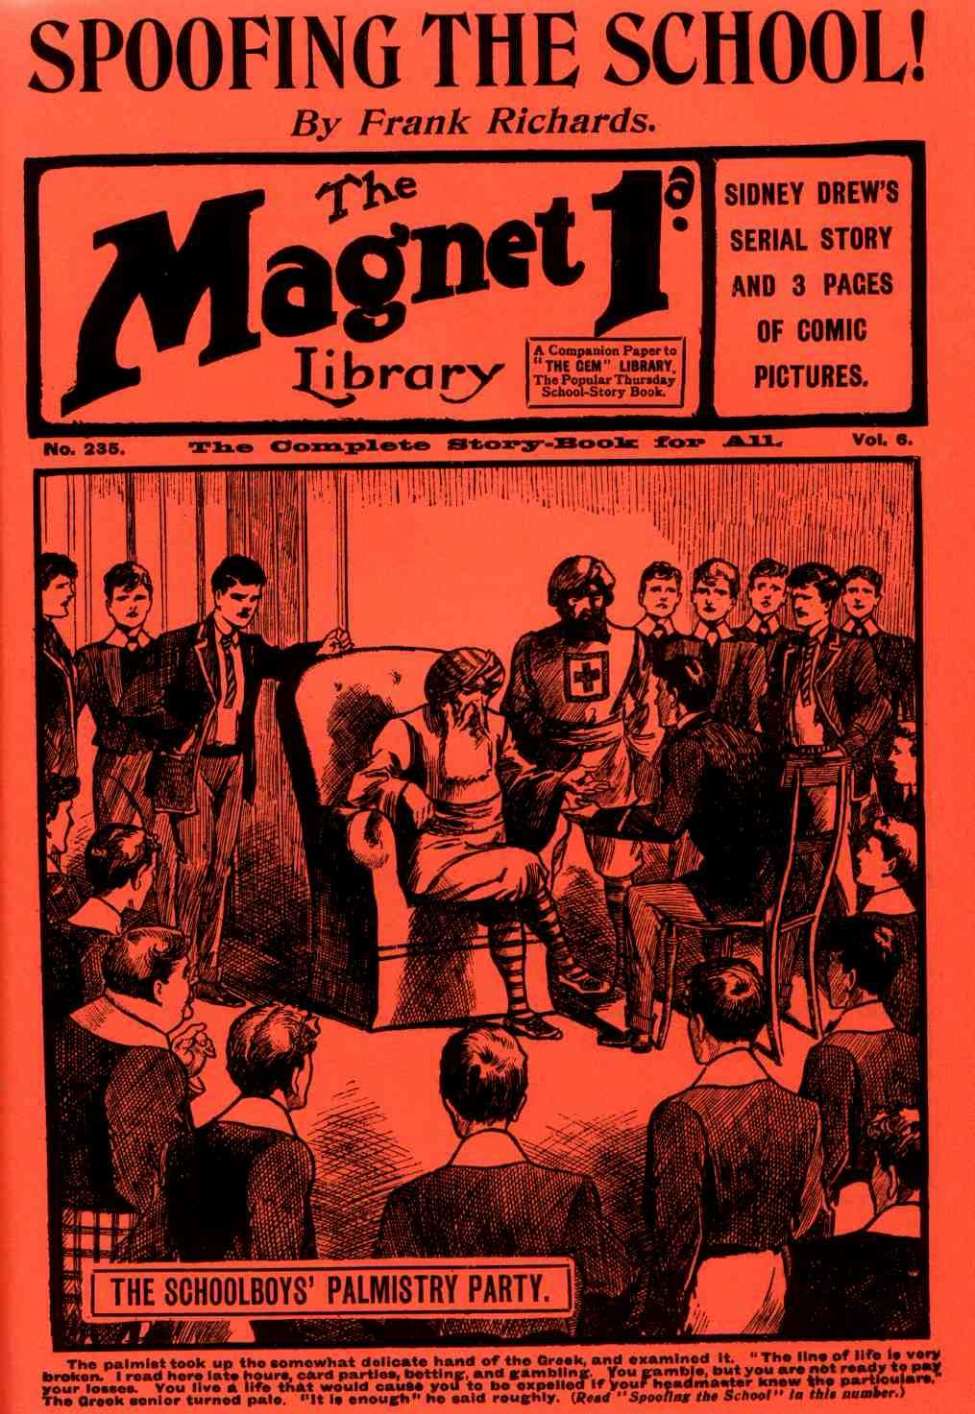 Book Cover For The Magnet 235 - Spoofing the School!